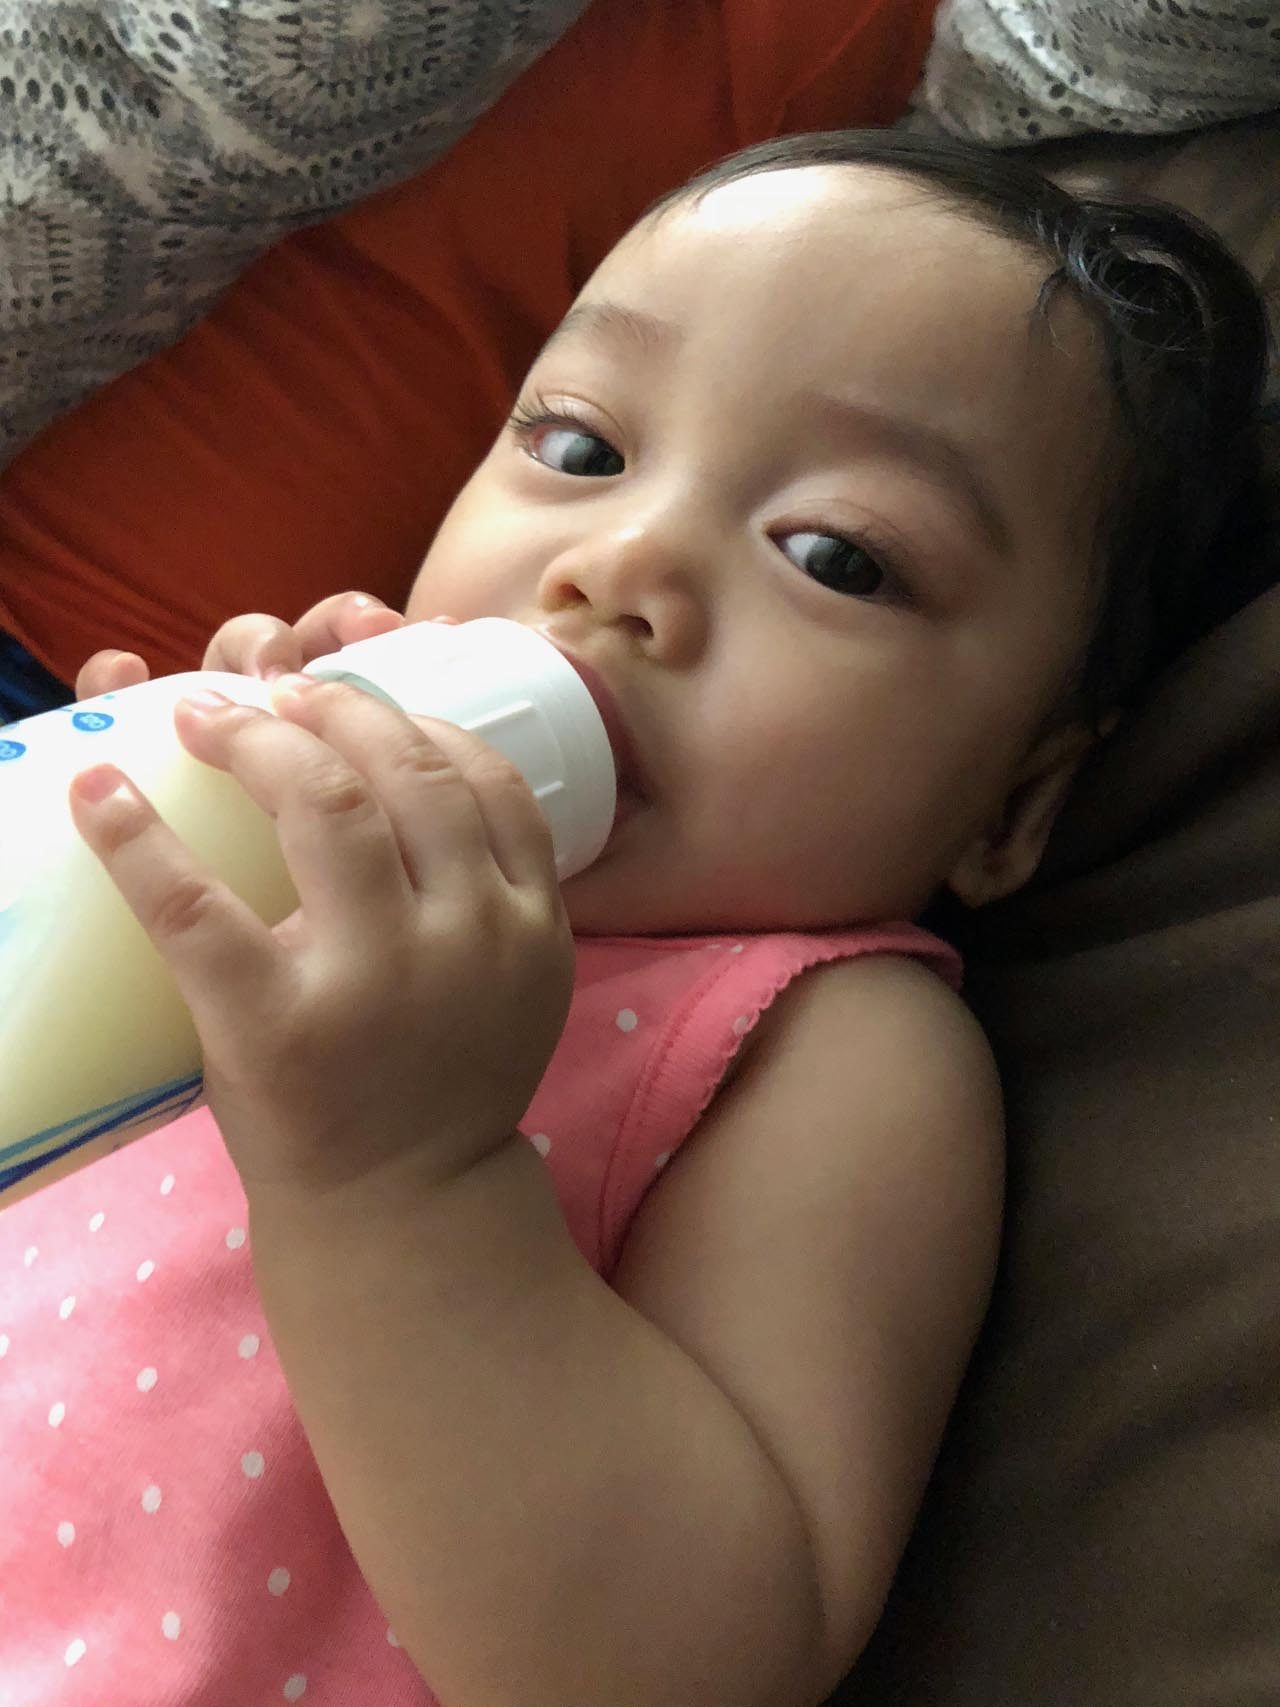 Raya uses a regular bottle with breast milk when Ana is not around to feed her 